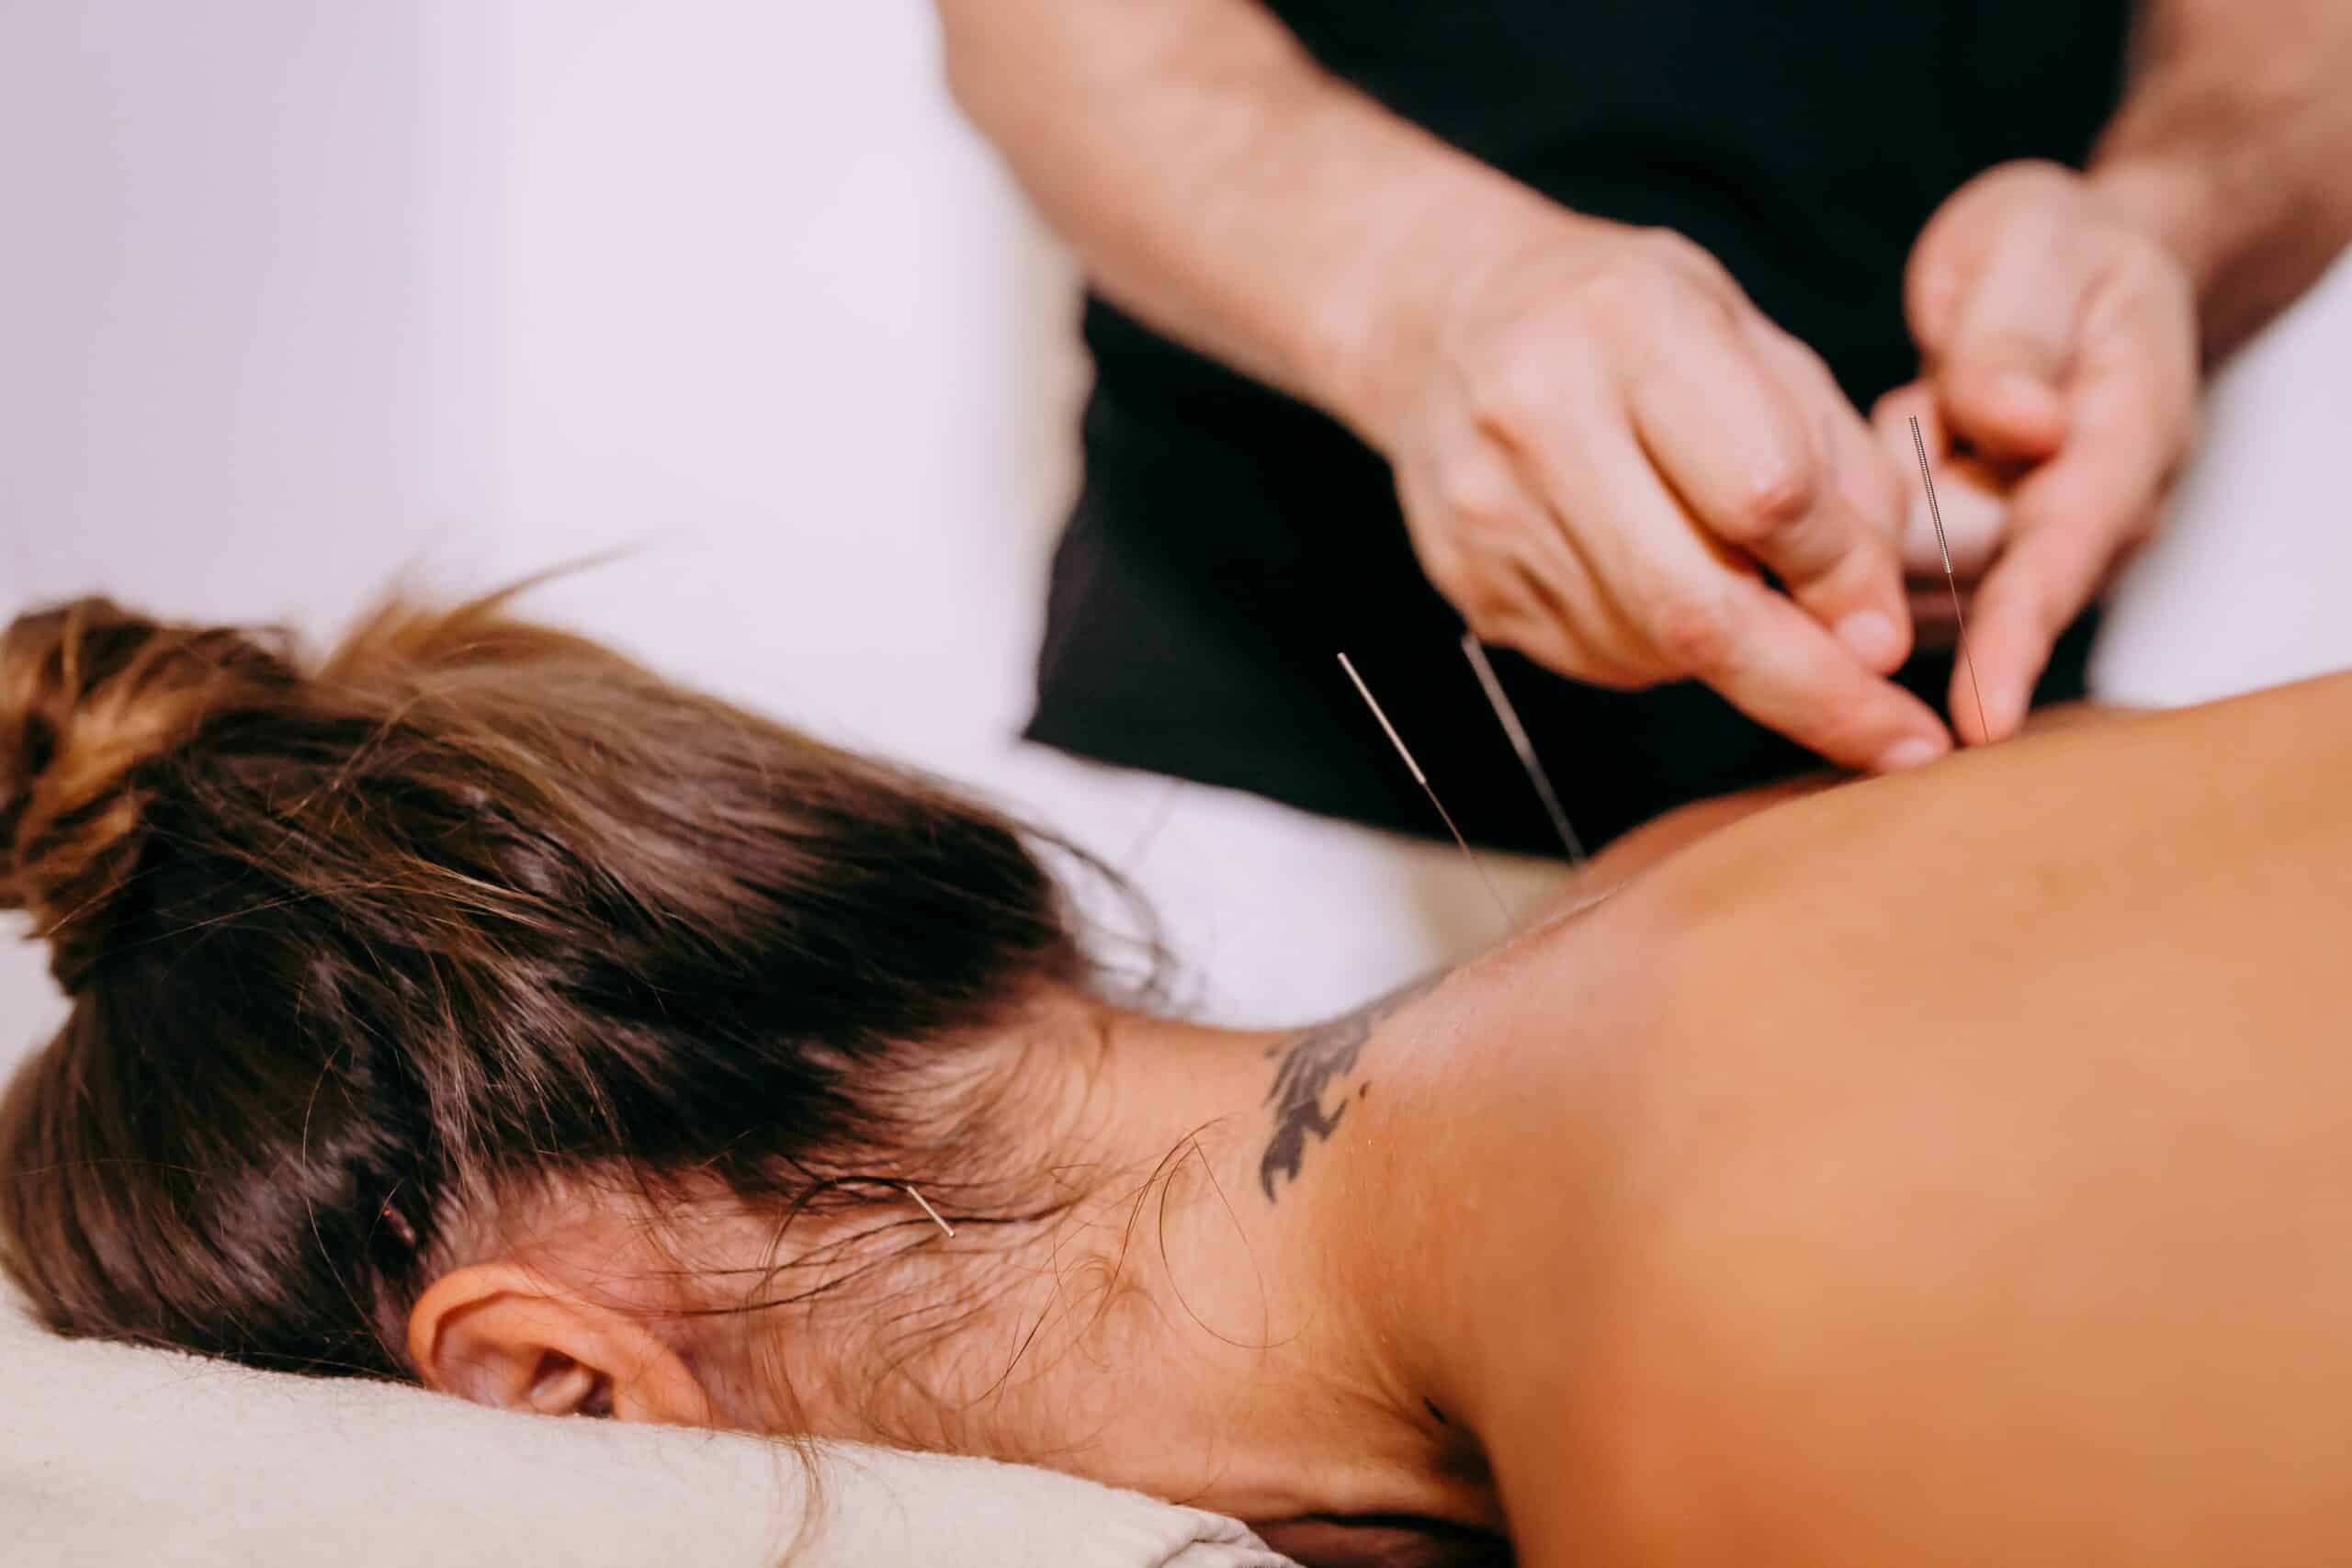 Dry needling TMJ chiropractic for neck and TMJ pain